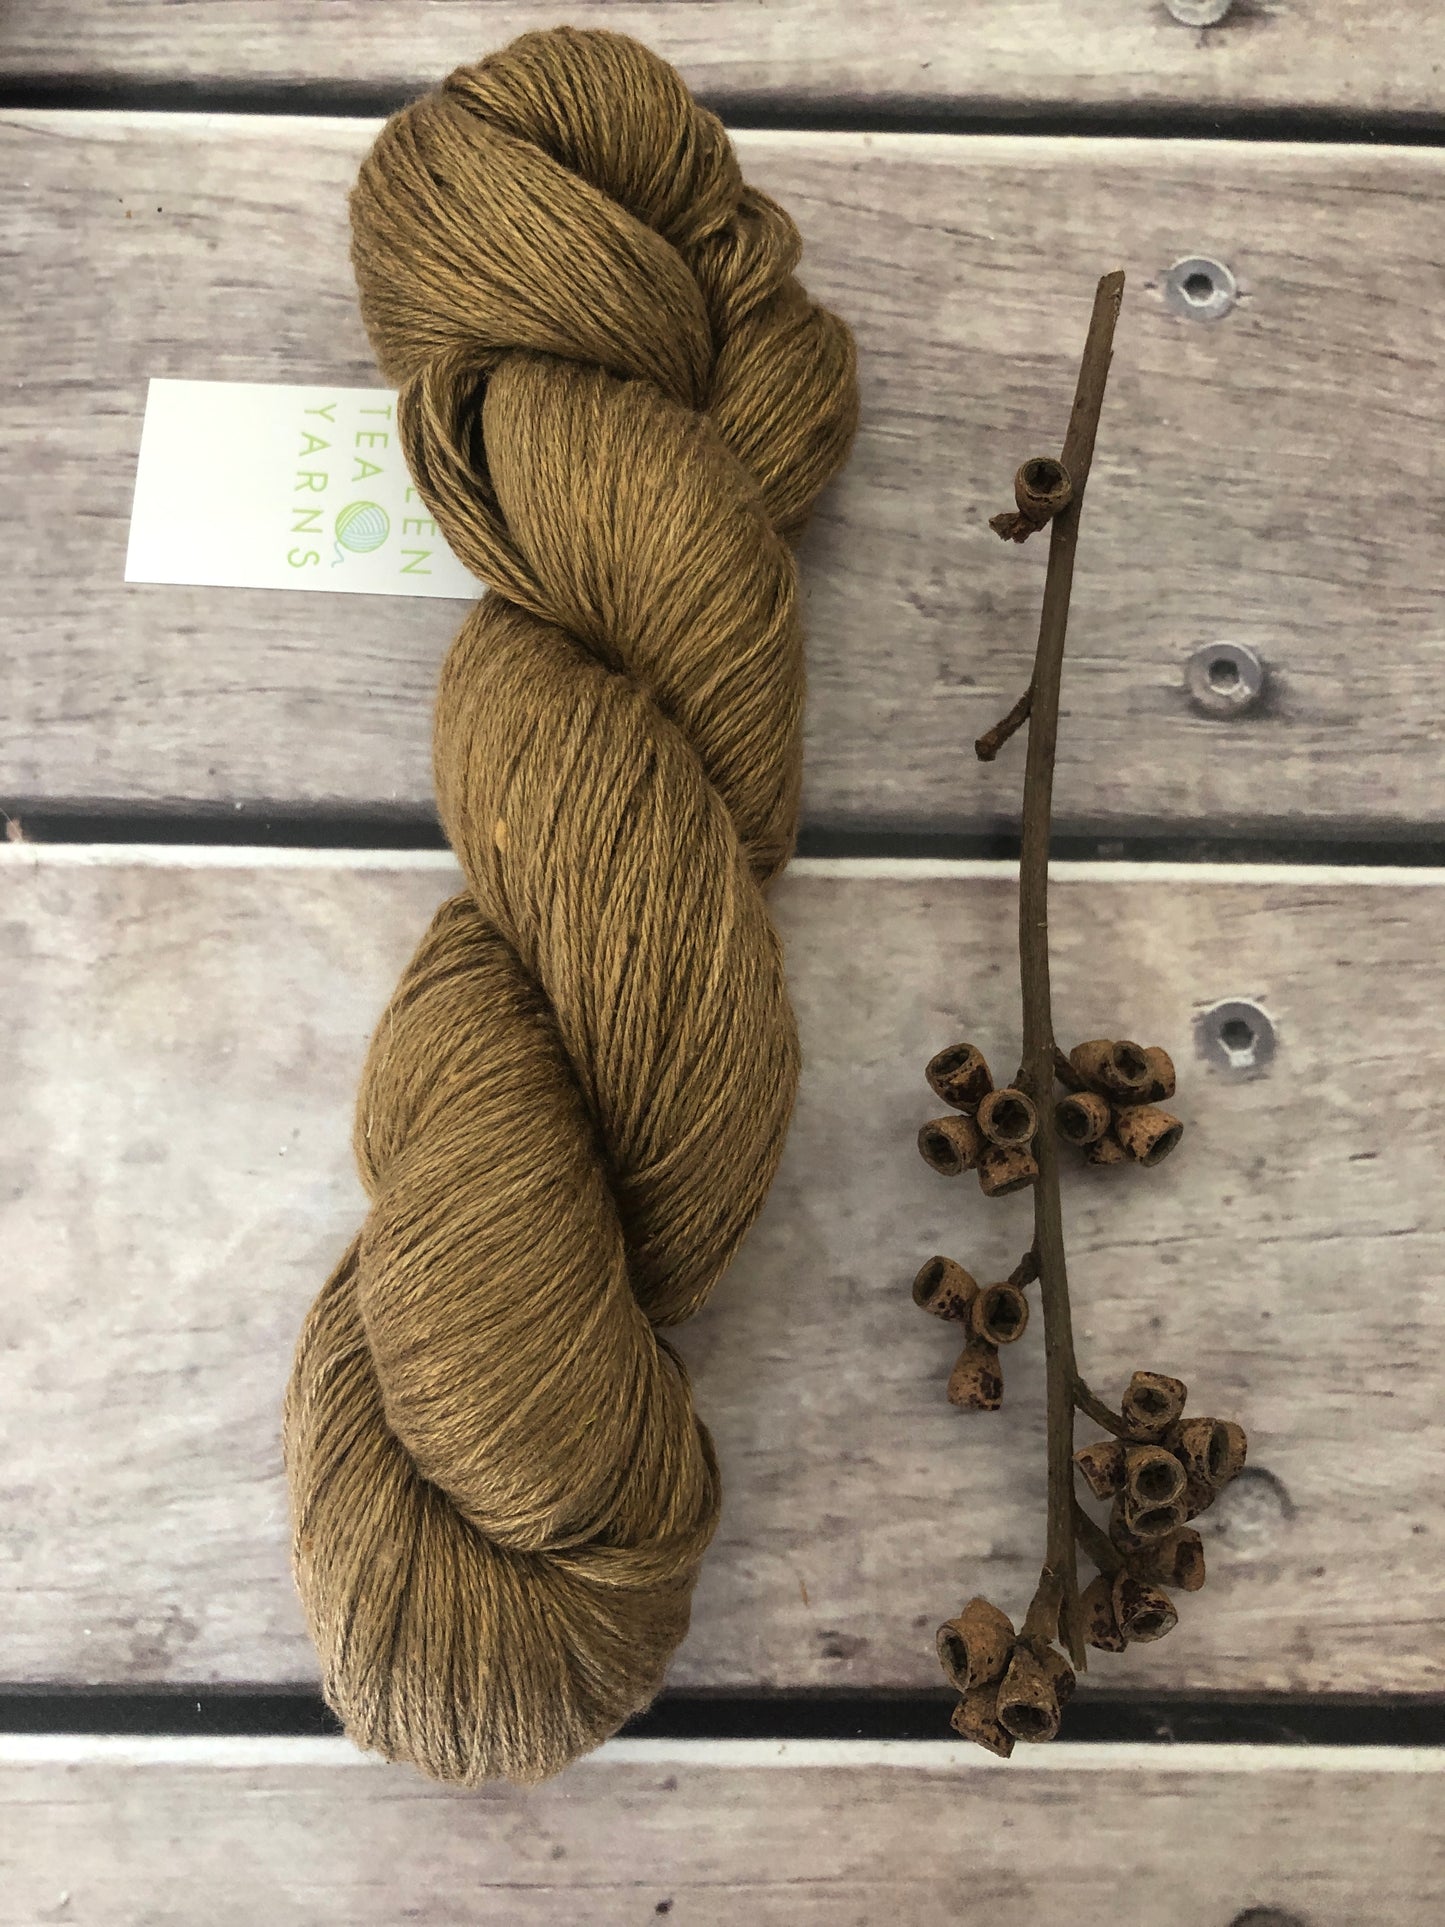 Gumnuts on Linden - 4 ply silk and linen yarn